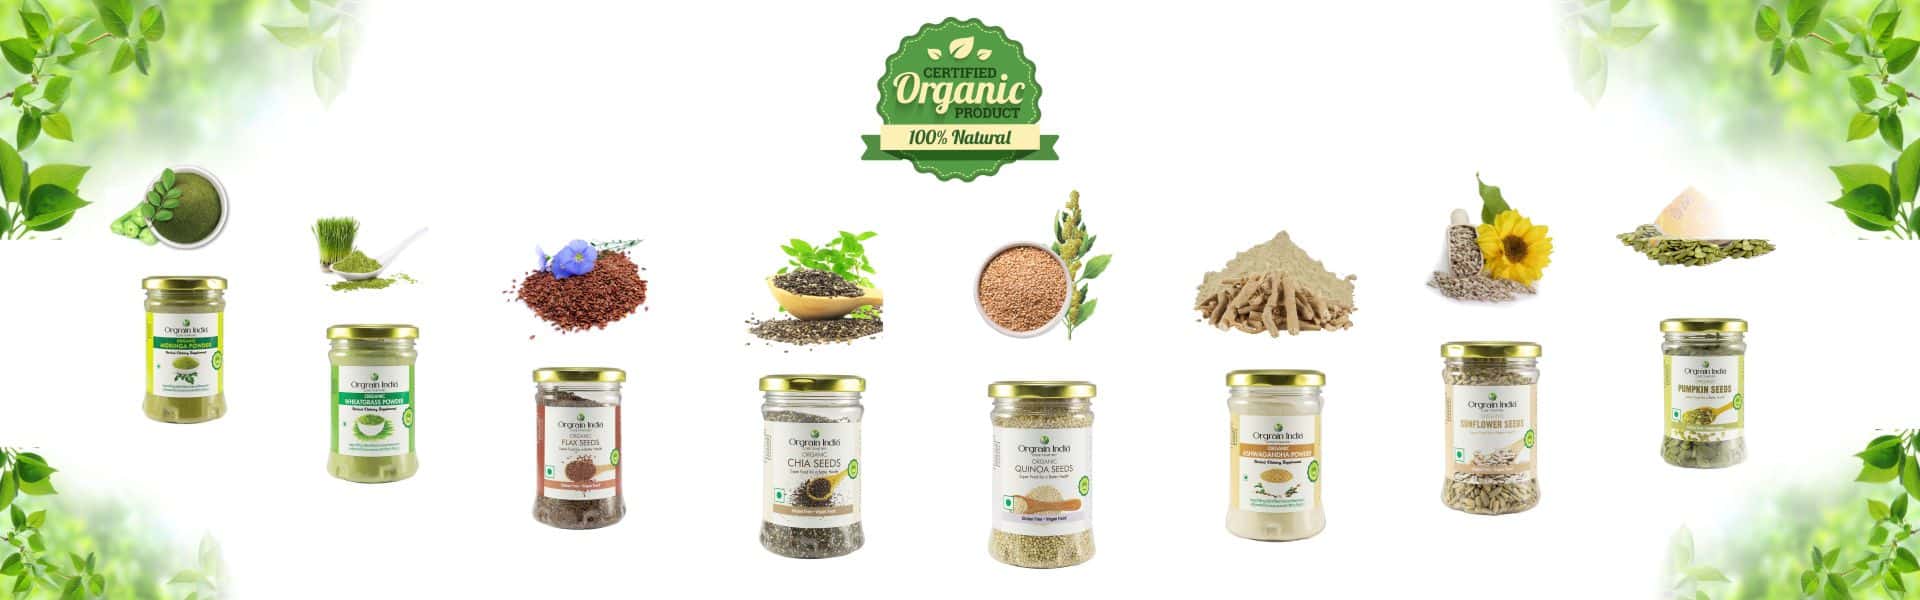 ORGANIC PRODUCTS